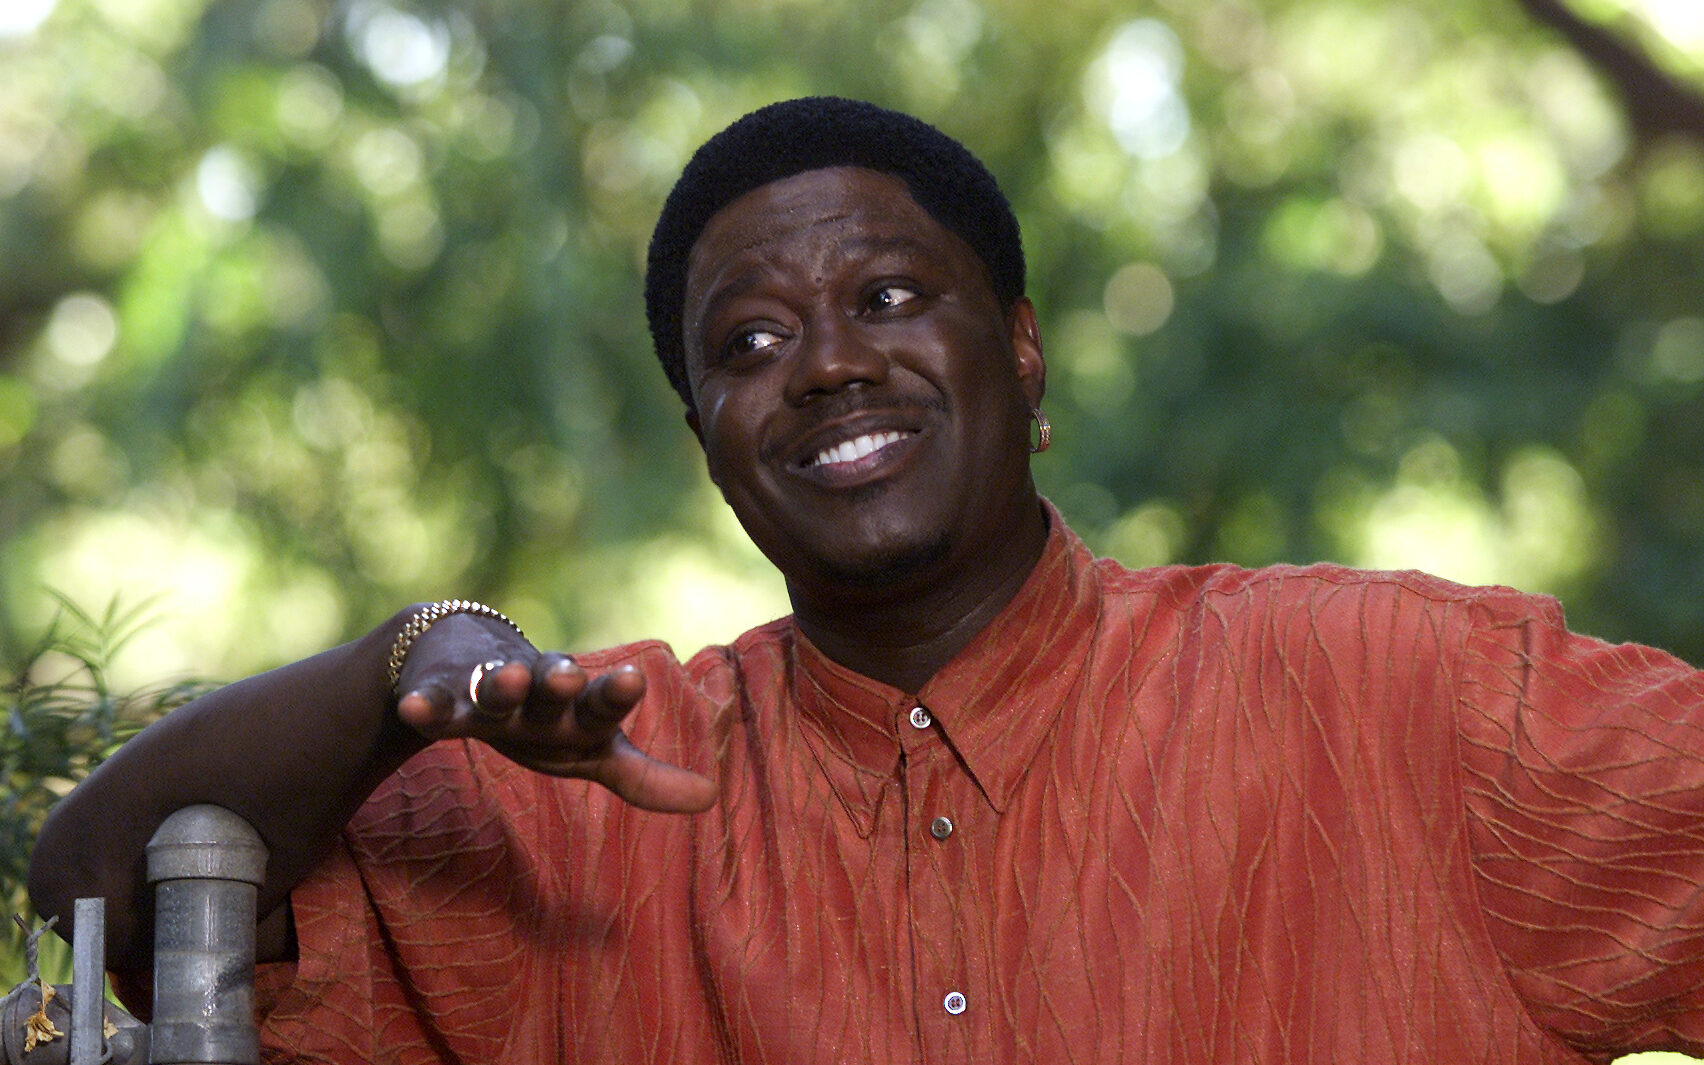 Comedian Bernie Mac takes a break during a recent taping of his show for Fox TV. (Photo by Myung J. Chun/Los Angeles Times via Getty Images)